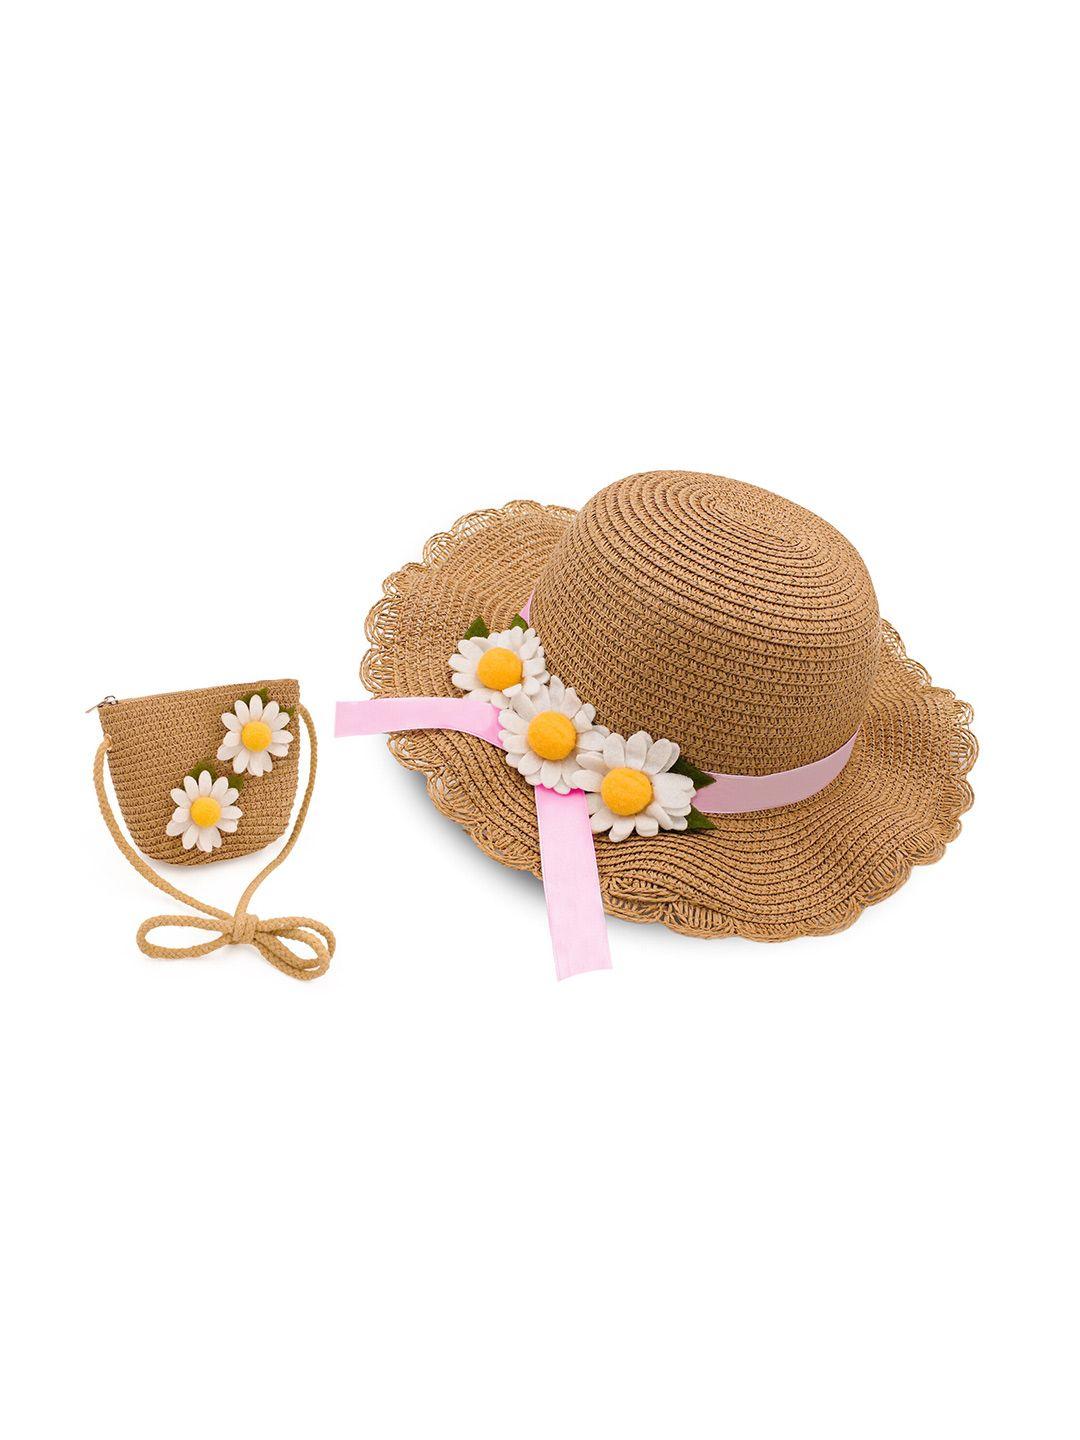 jenna floral embellished sun hat with pouch